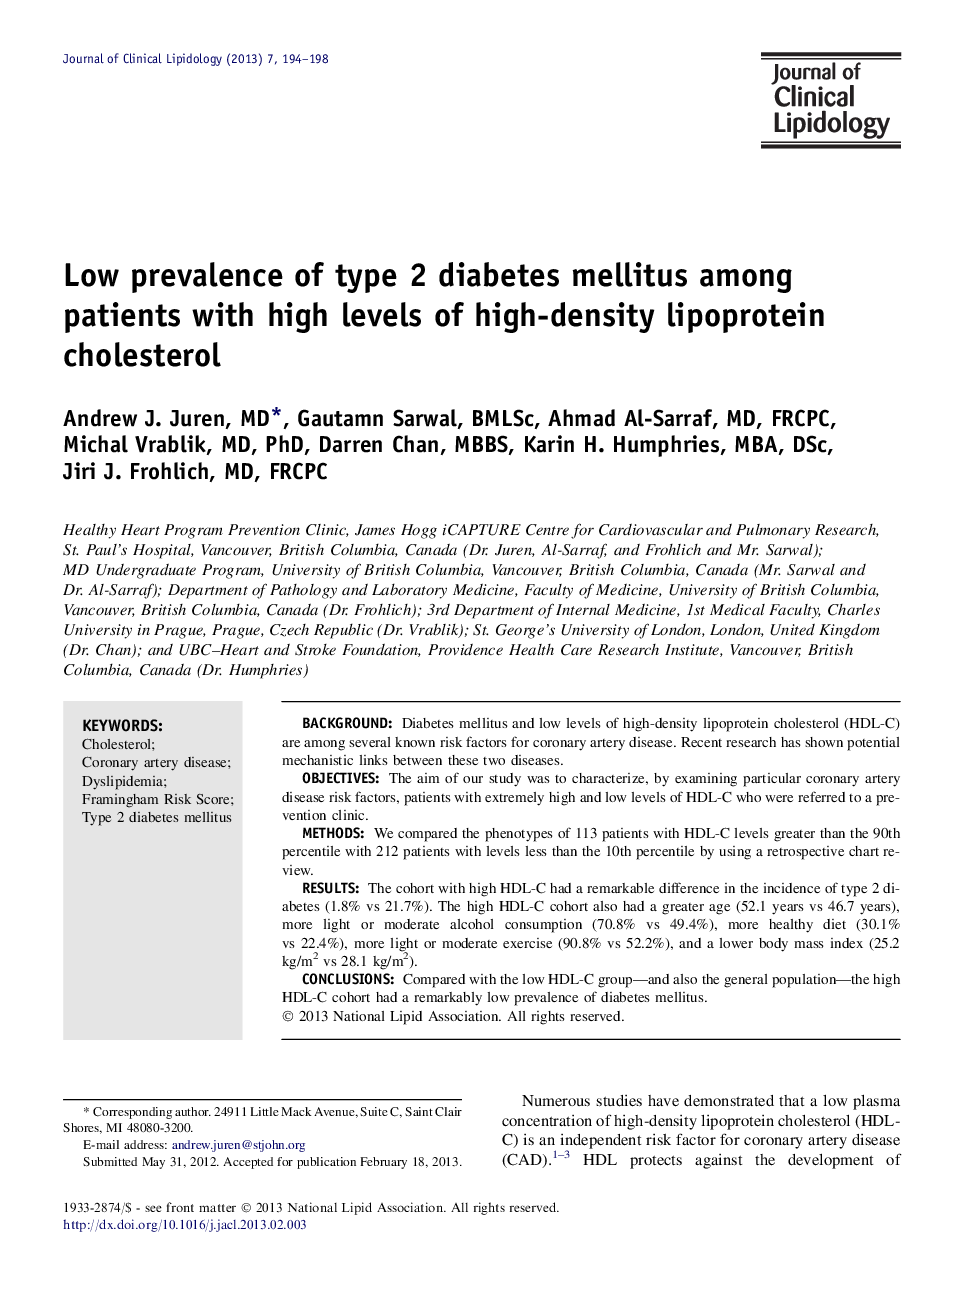 Low prevalence of type 2 diabetes mellitus among patients with high levels of high-density lipoprotein cholesterol